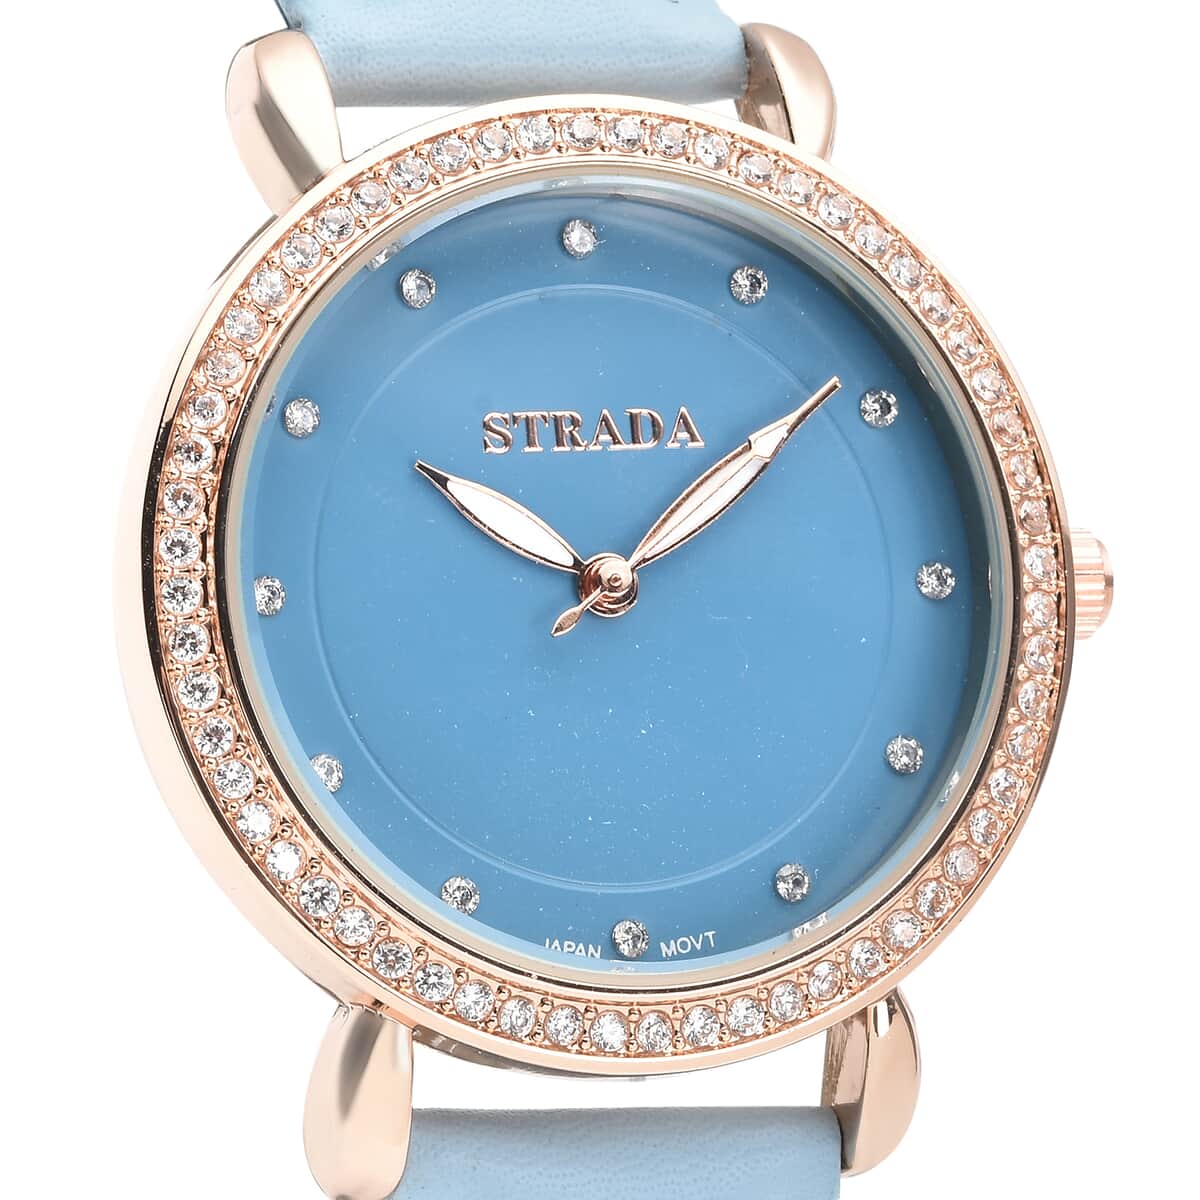 Strada Simulated Diamond Japanese Movement Watch in Rosetone with Blue Faux Leather Strap 0.50 ctw image number 3